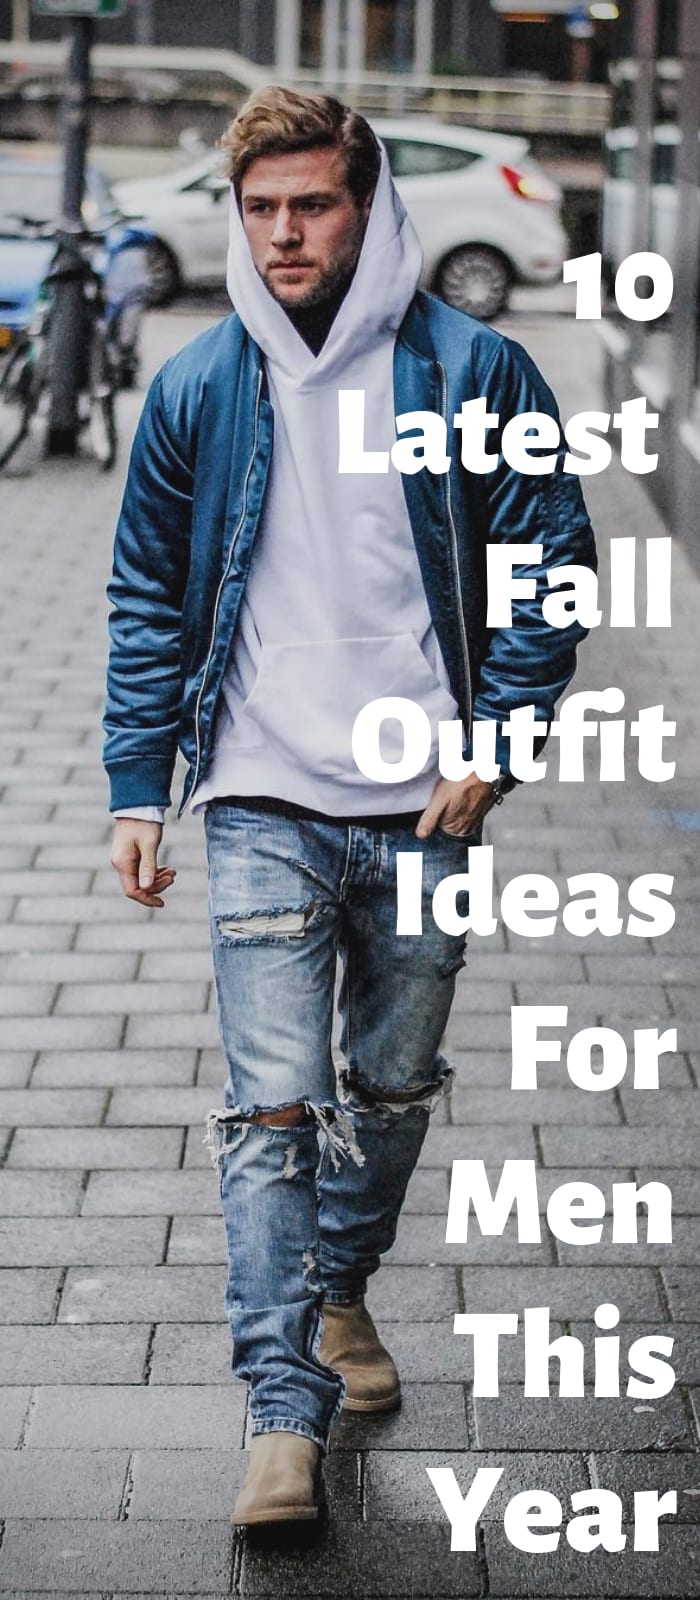 10 Latest Fall Outfit Ideas For Men This Year (1)